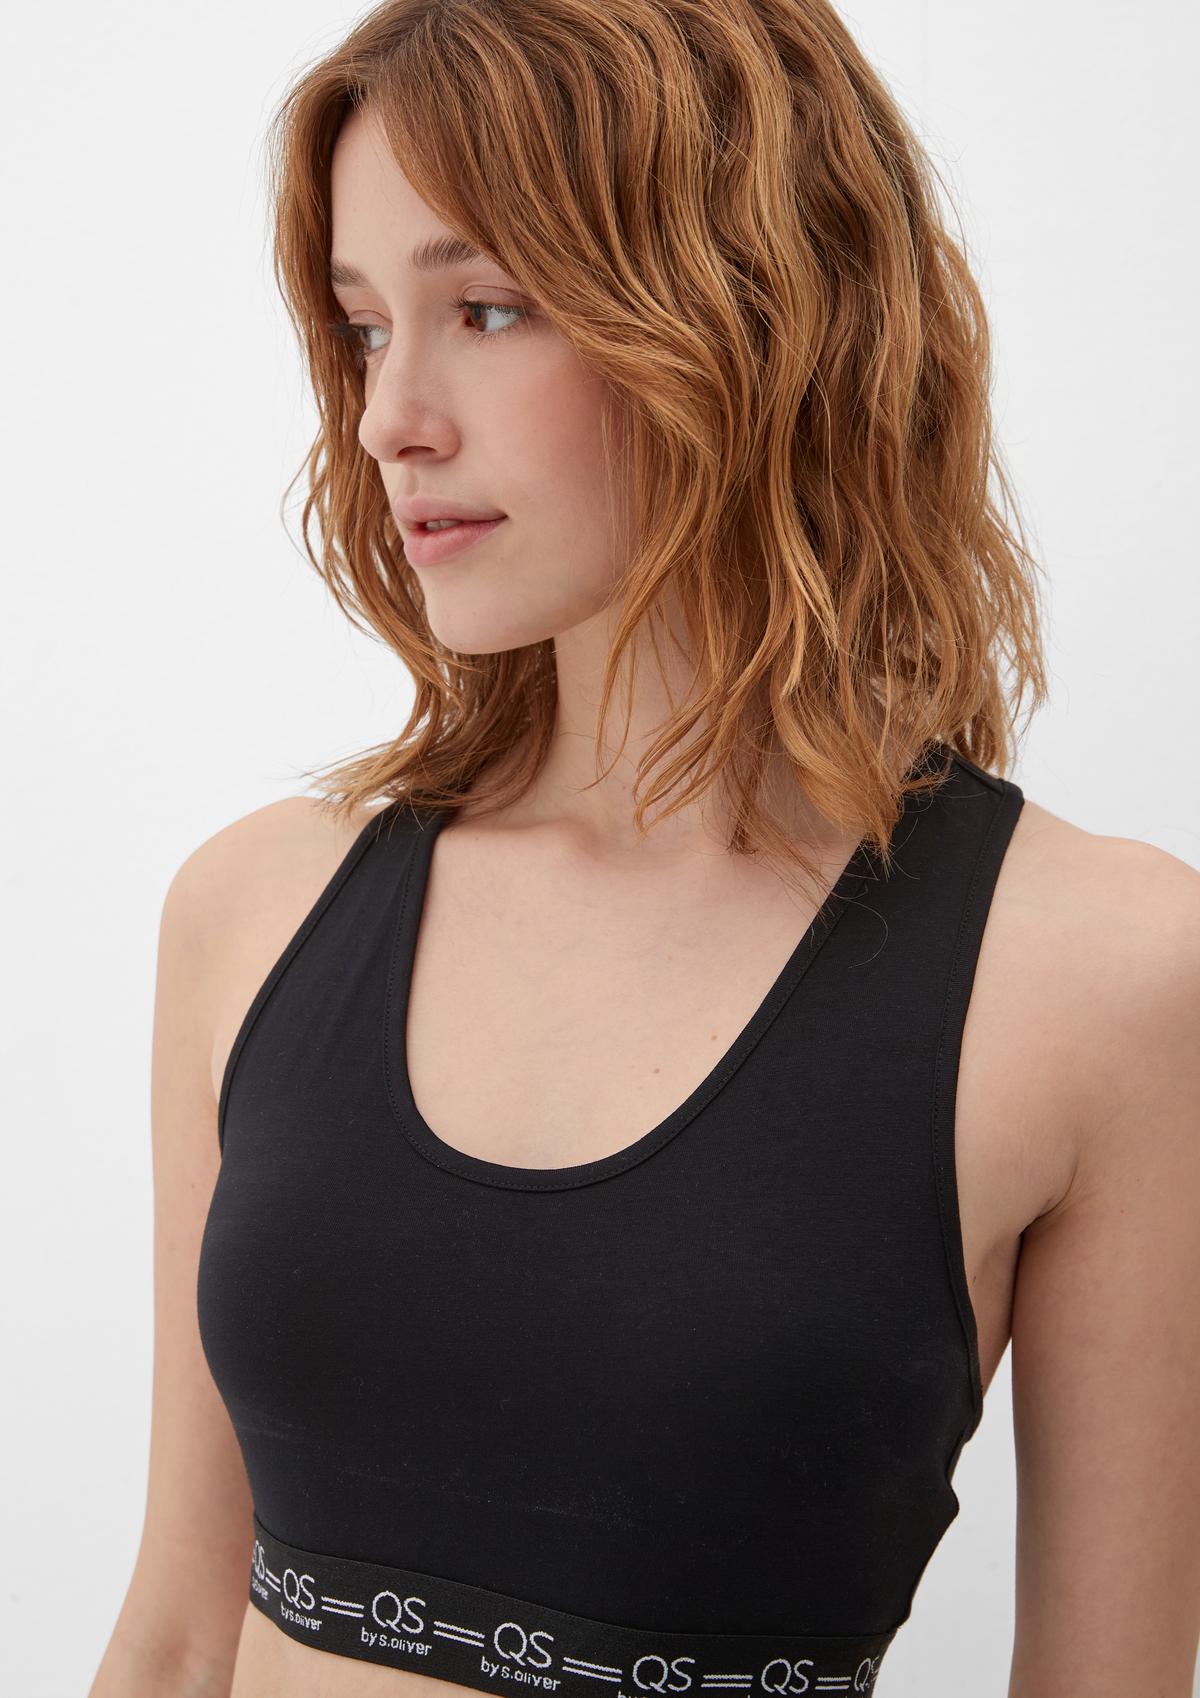 s.Oliver Sports bra with a racer back